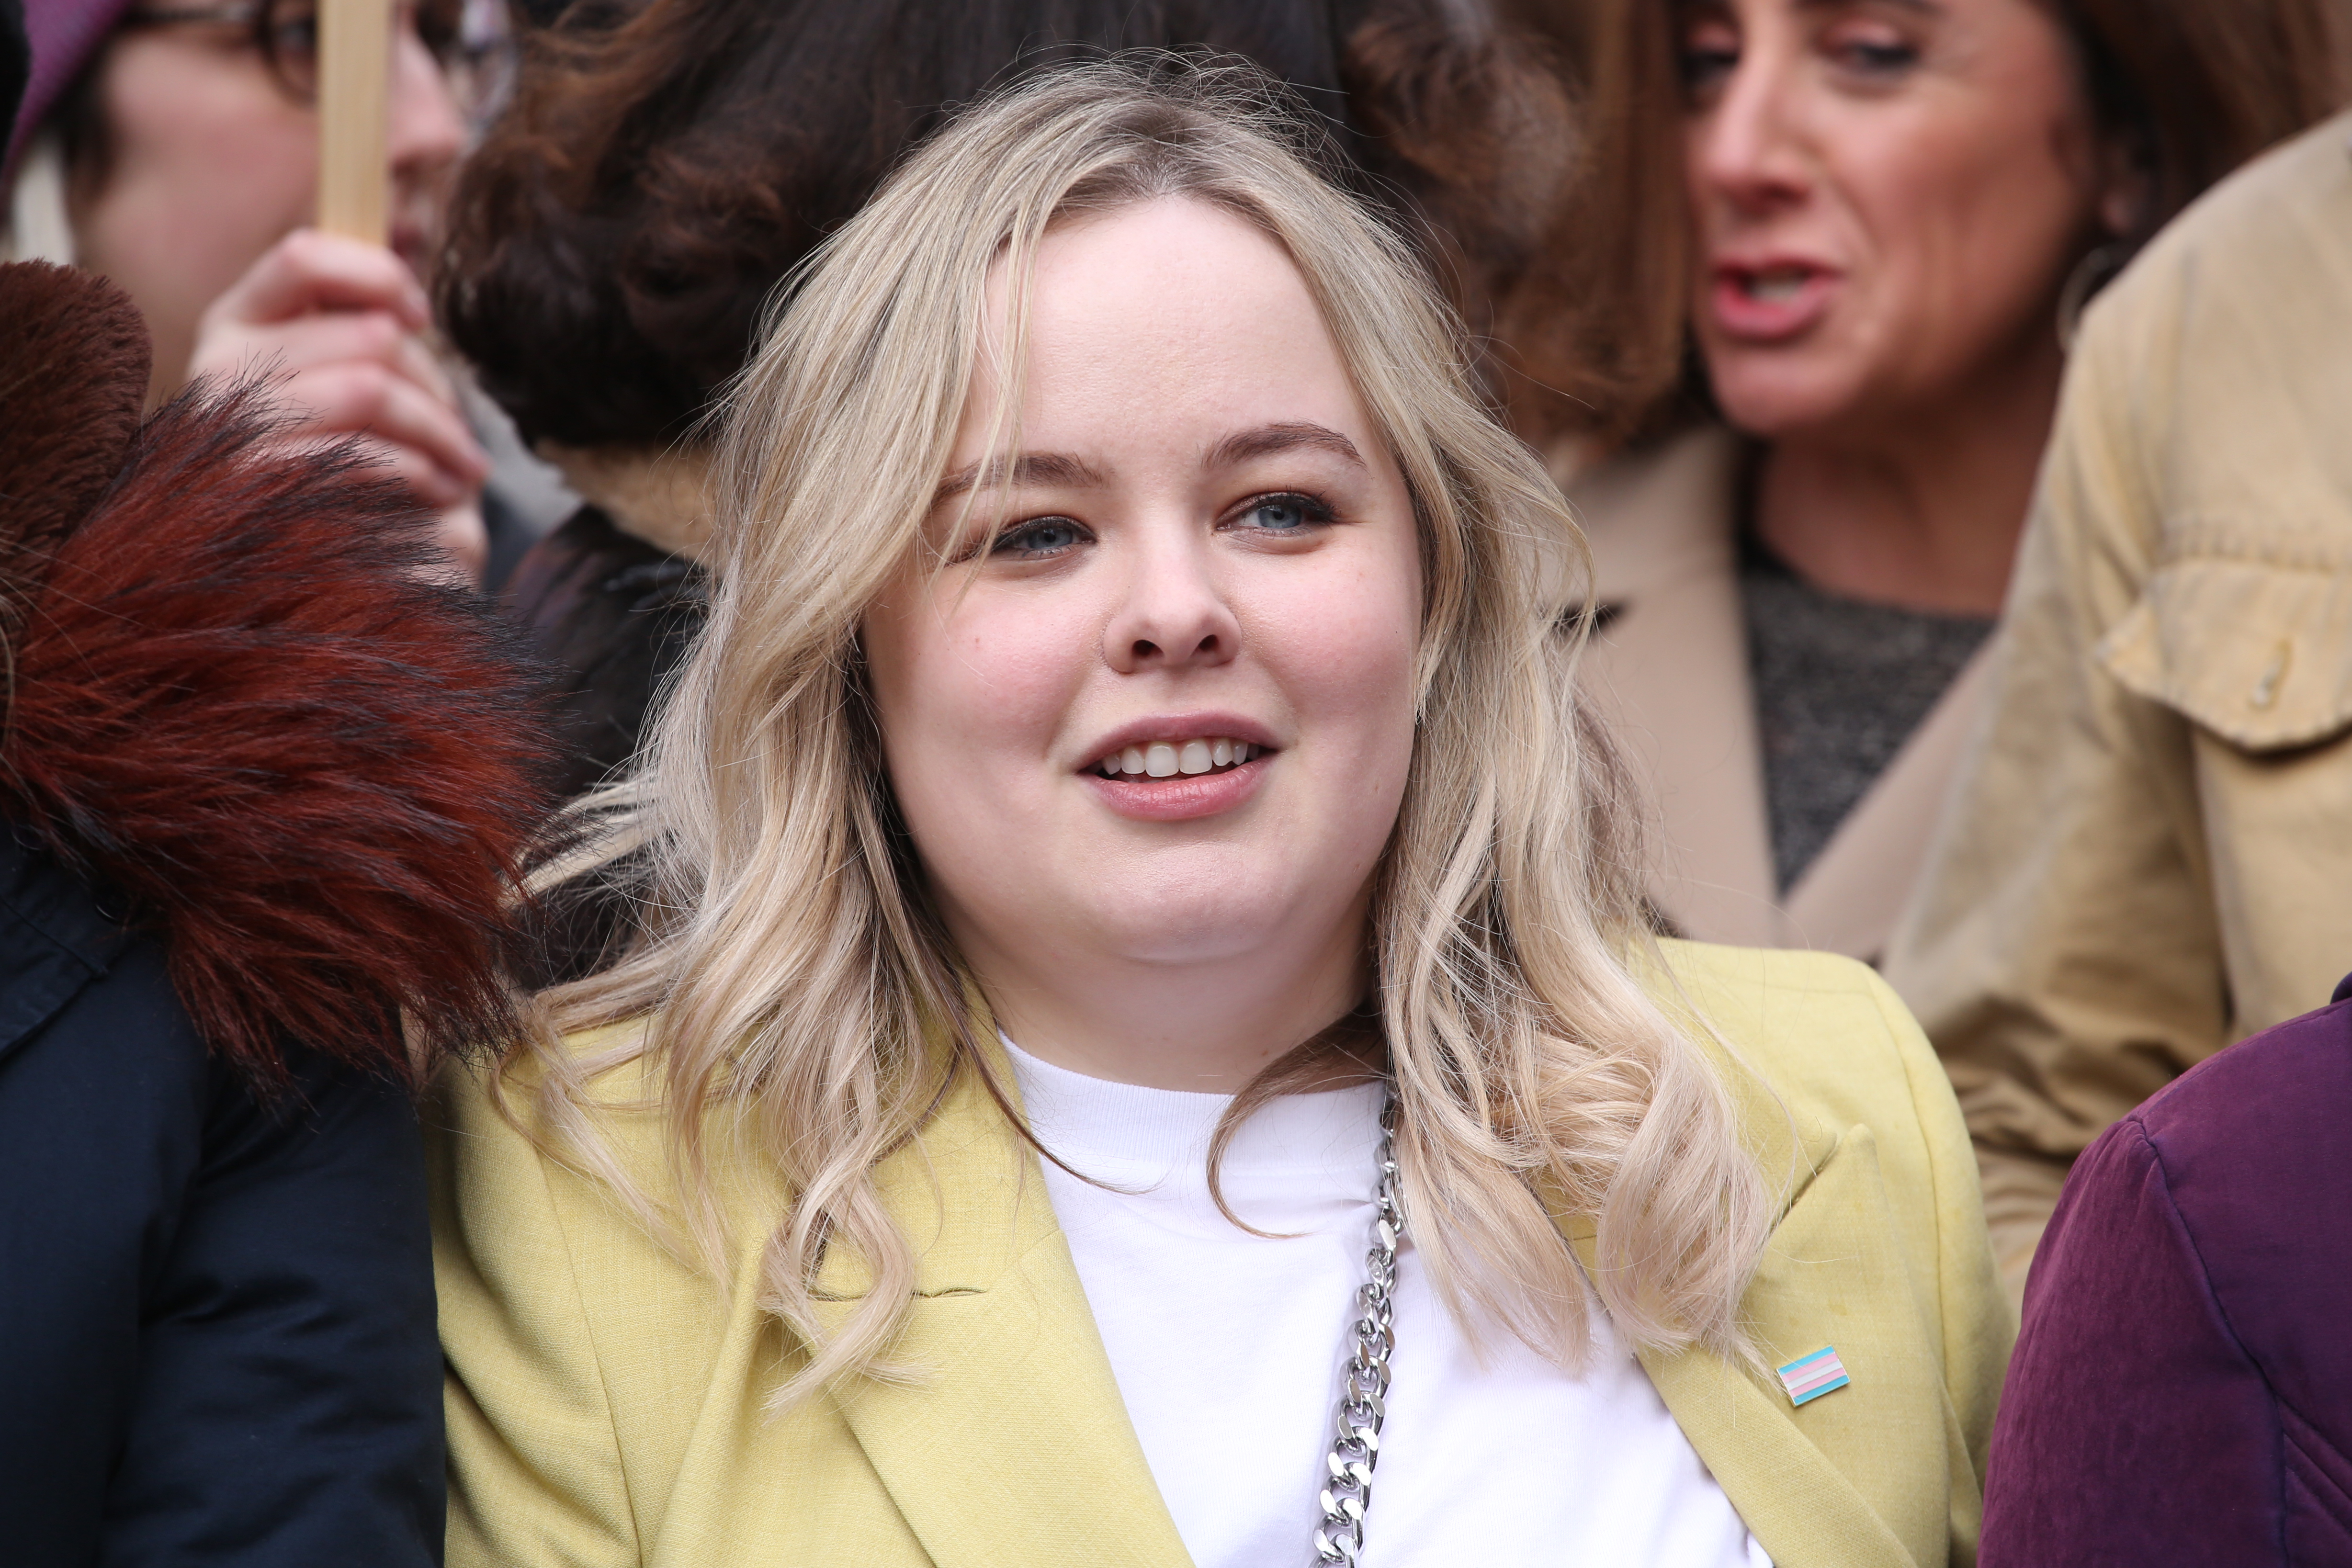 Nicola Coughlan at a #March4Women rally at Southbank Centre in London, England, on March 08, 2020. | Source: Getty Images